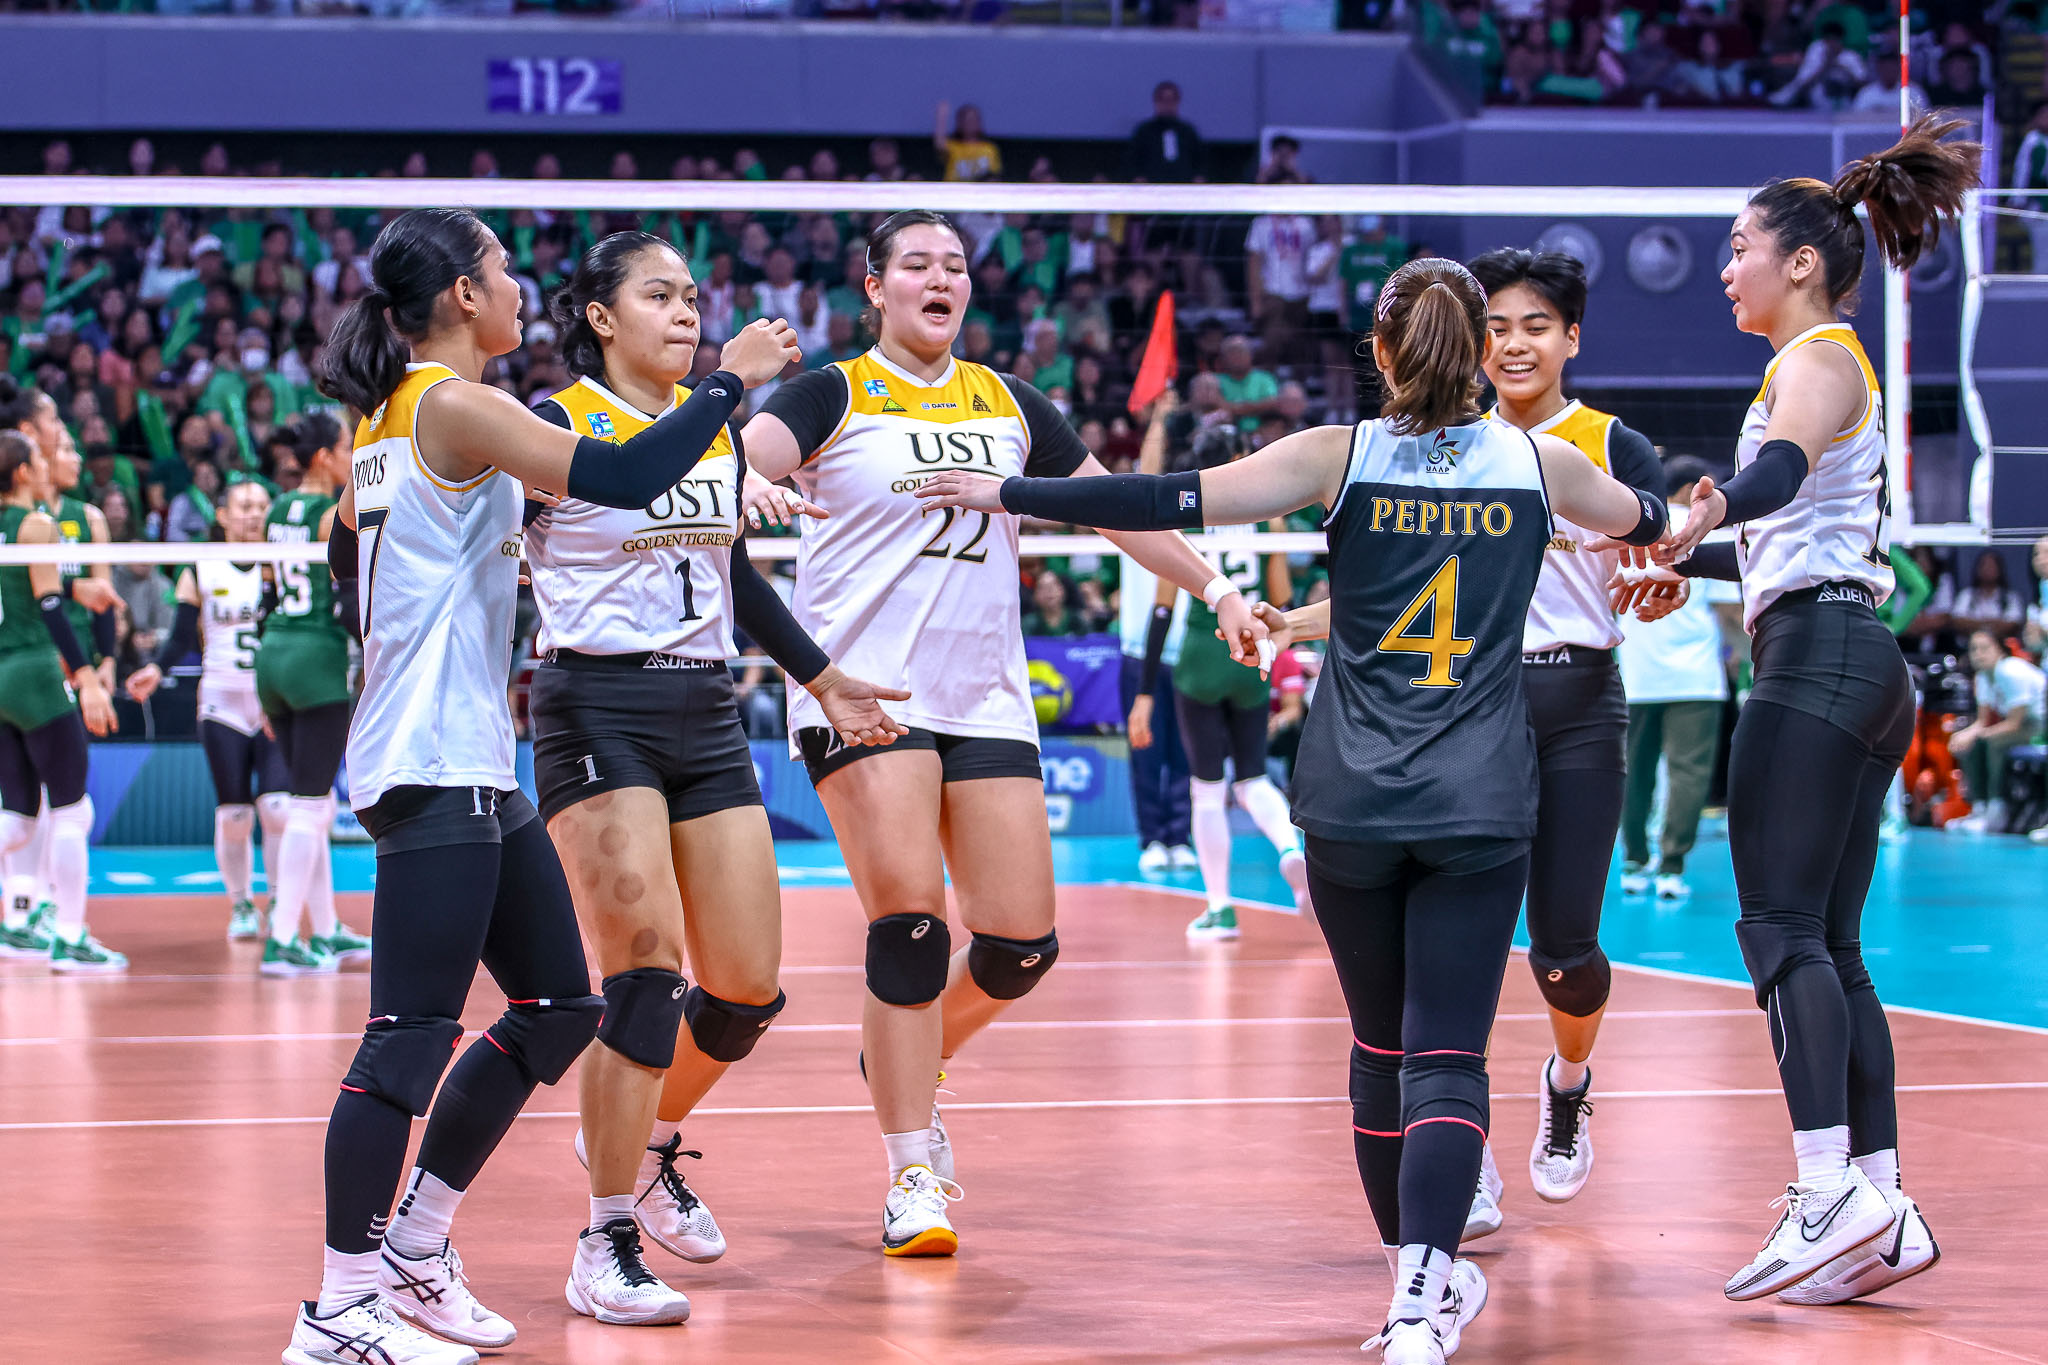 uaap volleyball: ust, la salle face off in crucial clash